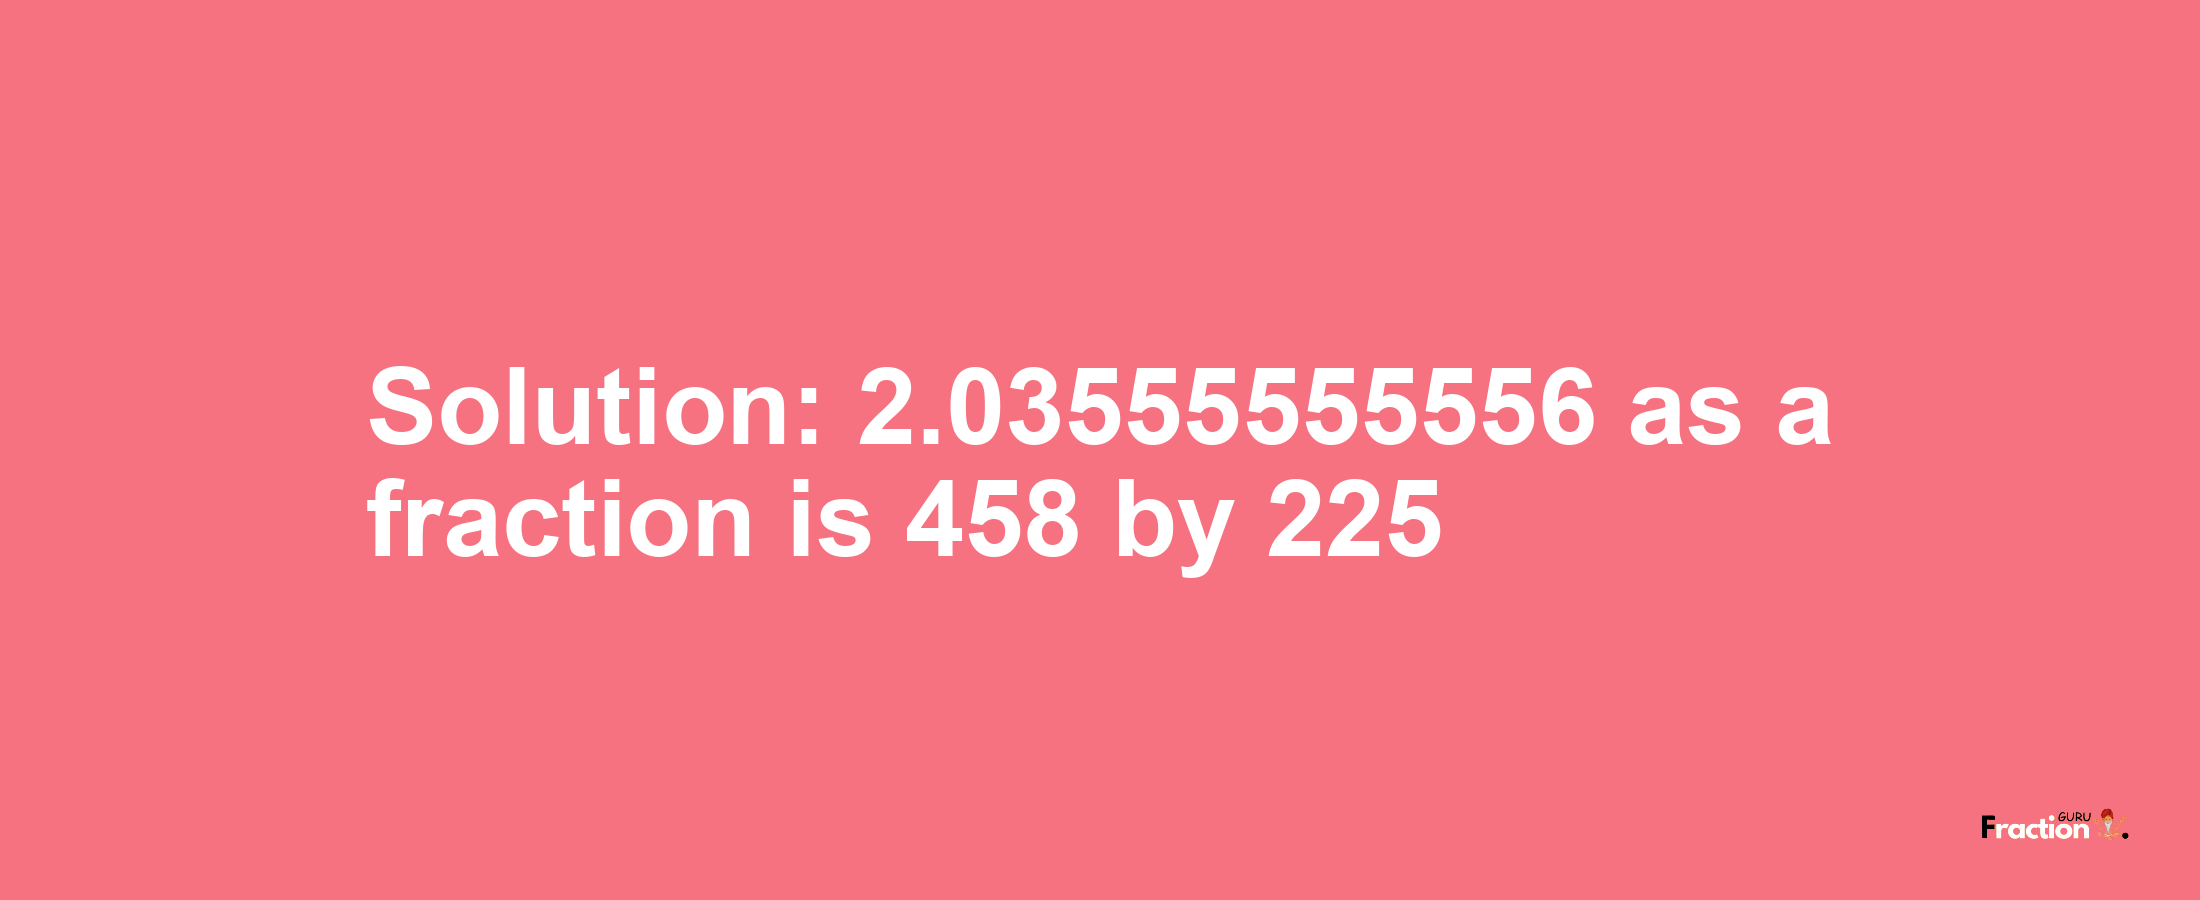 Solution:2.03555555556 as a fraction is 458/225